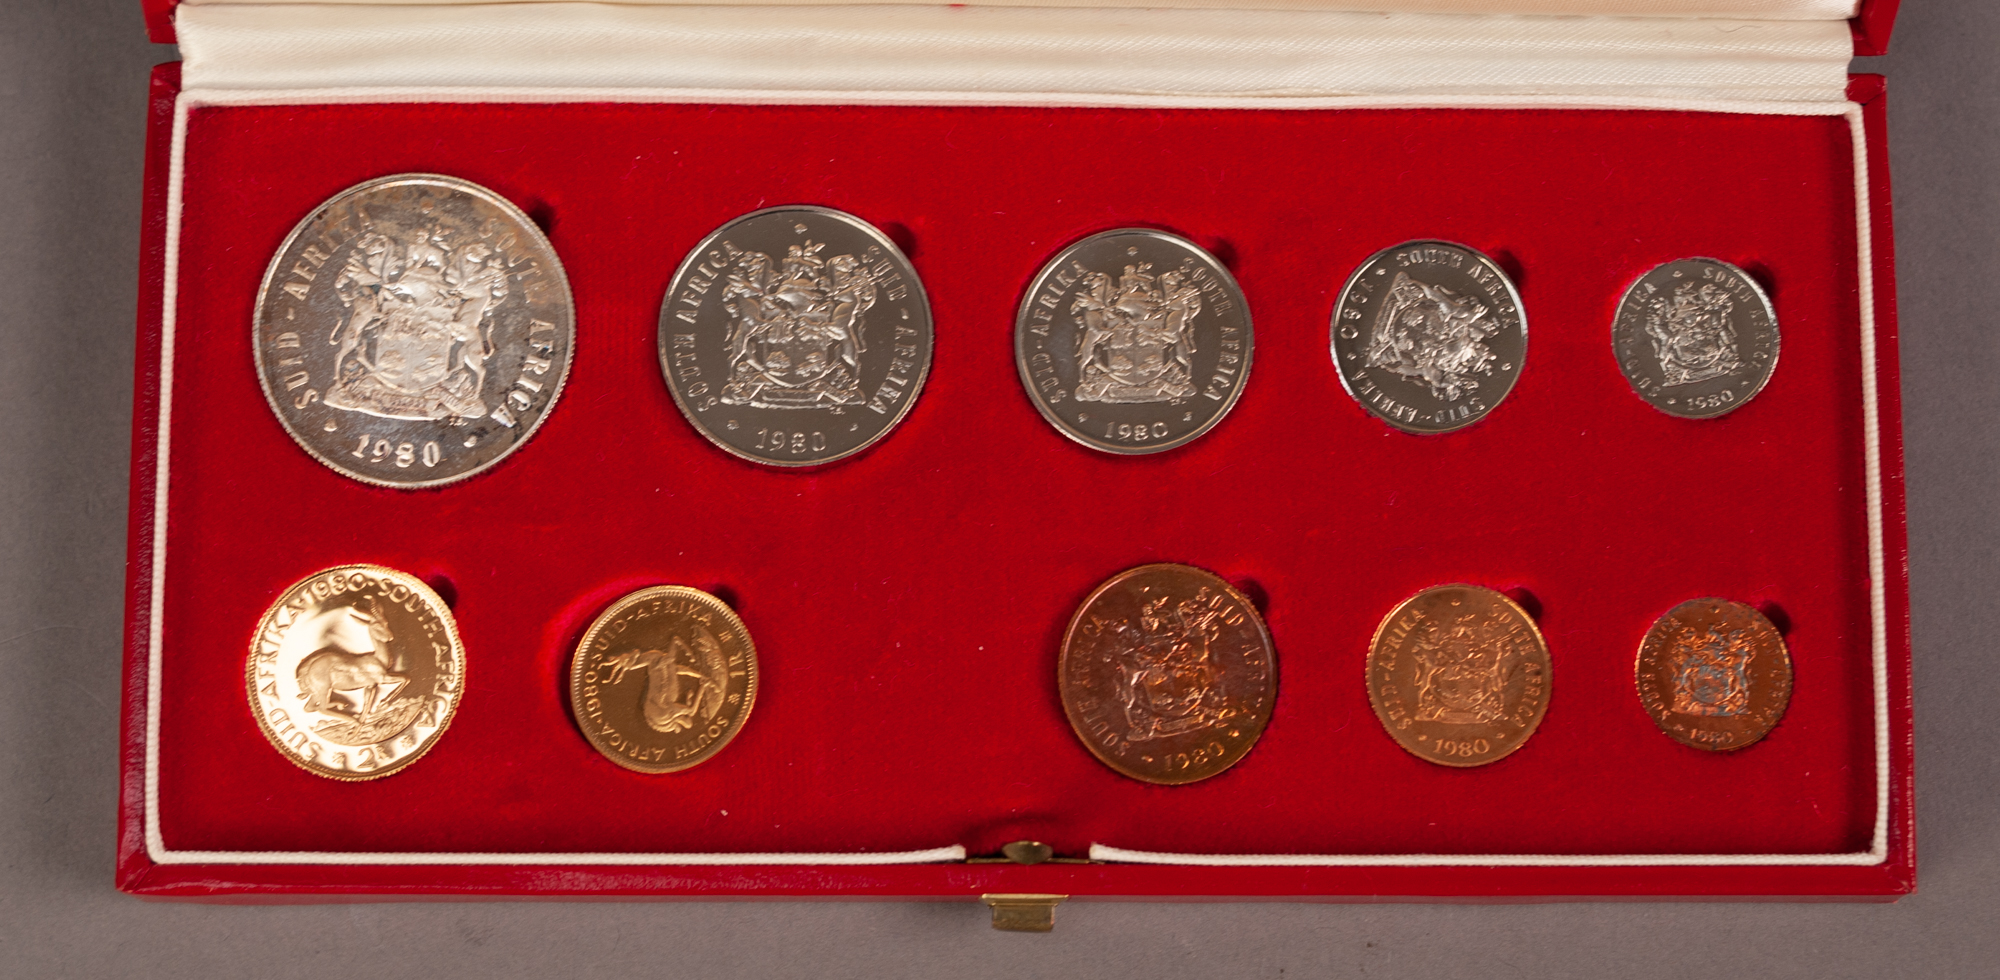 1980 SOUTH AFRICAN TEN COIN SET INCLUDING A GOLD 2 RAND AND A GOLD 1 RAND COIN, both mint, 12.1g, in - Image 2 of 2